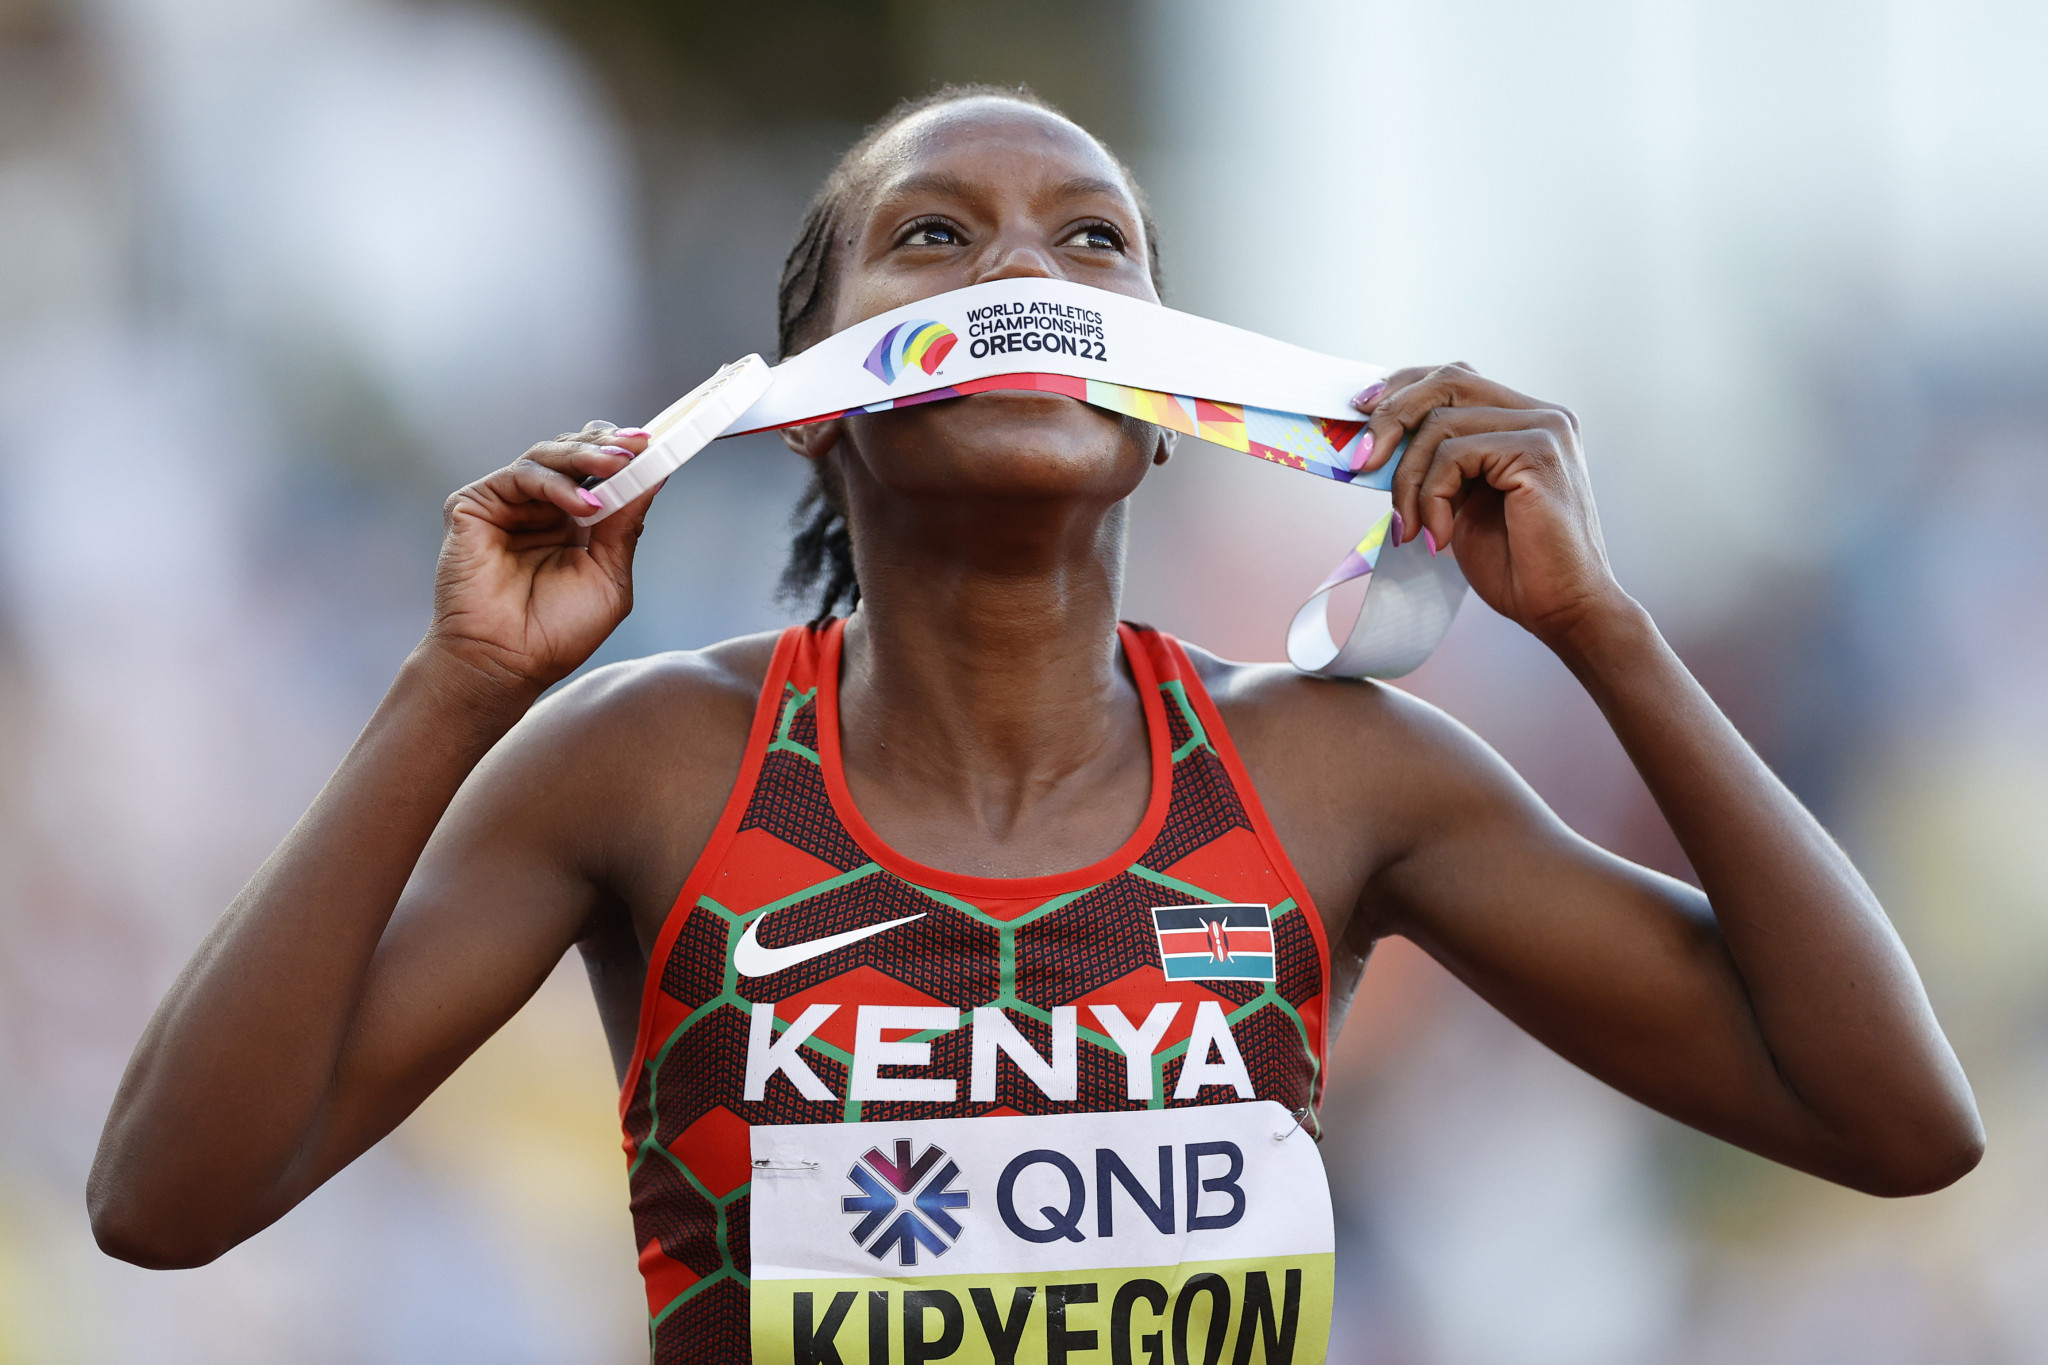 Kipyegon wins women's 1500m title with brave pace at World Athletics Championships